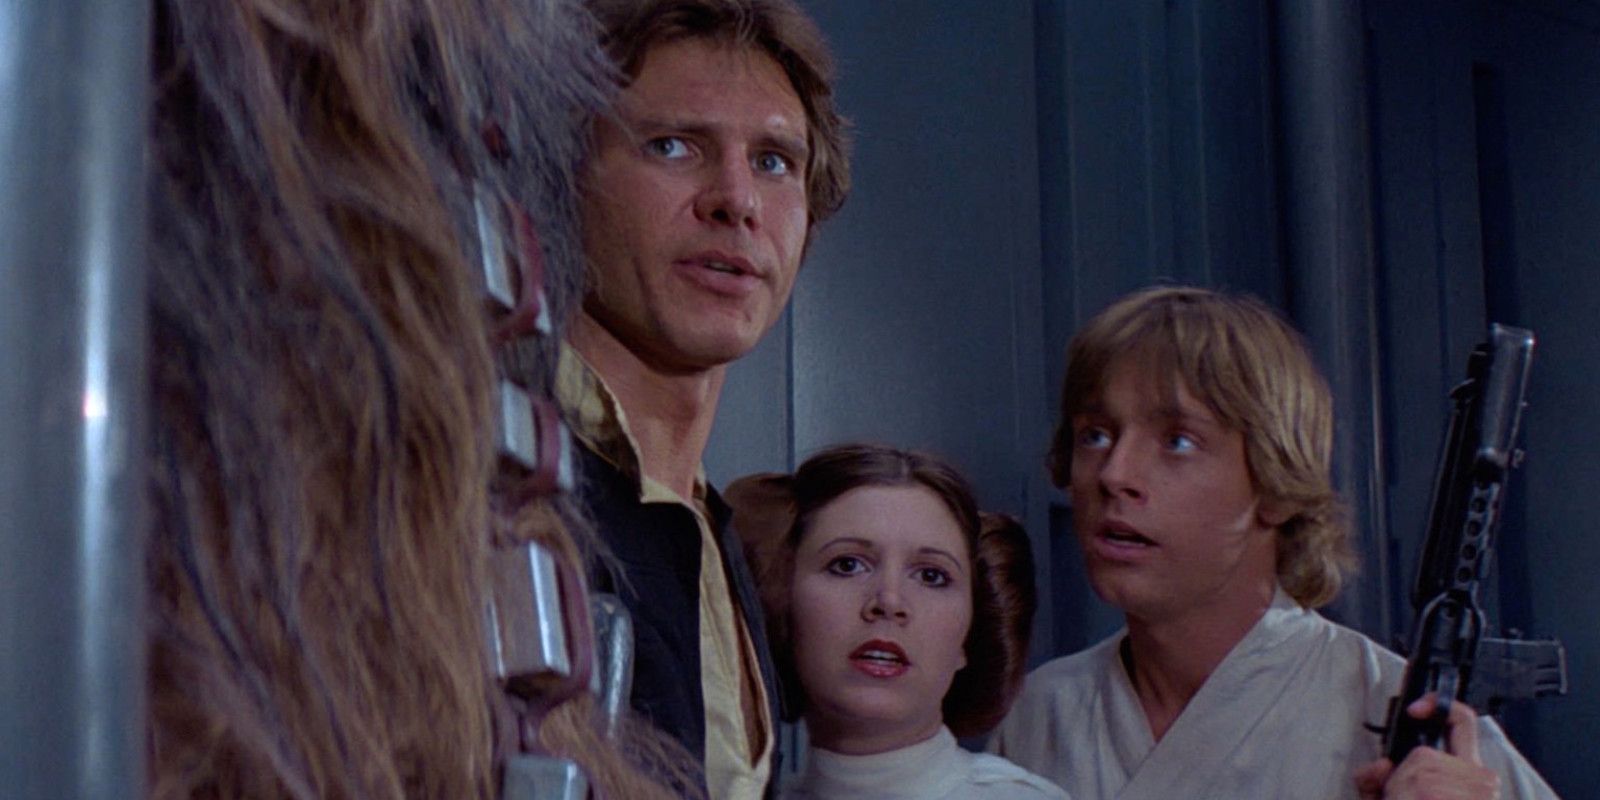 Chewbacca, Han, Leia, and Luke attempt to escaep the Death Star in A New Hope